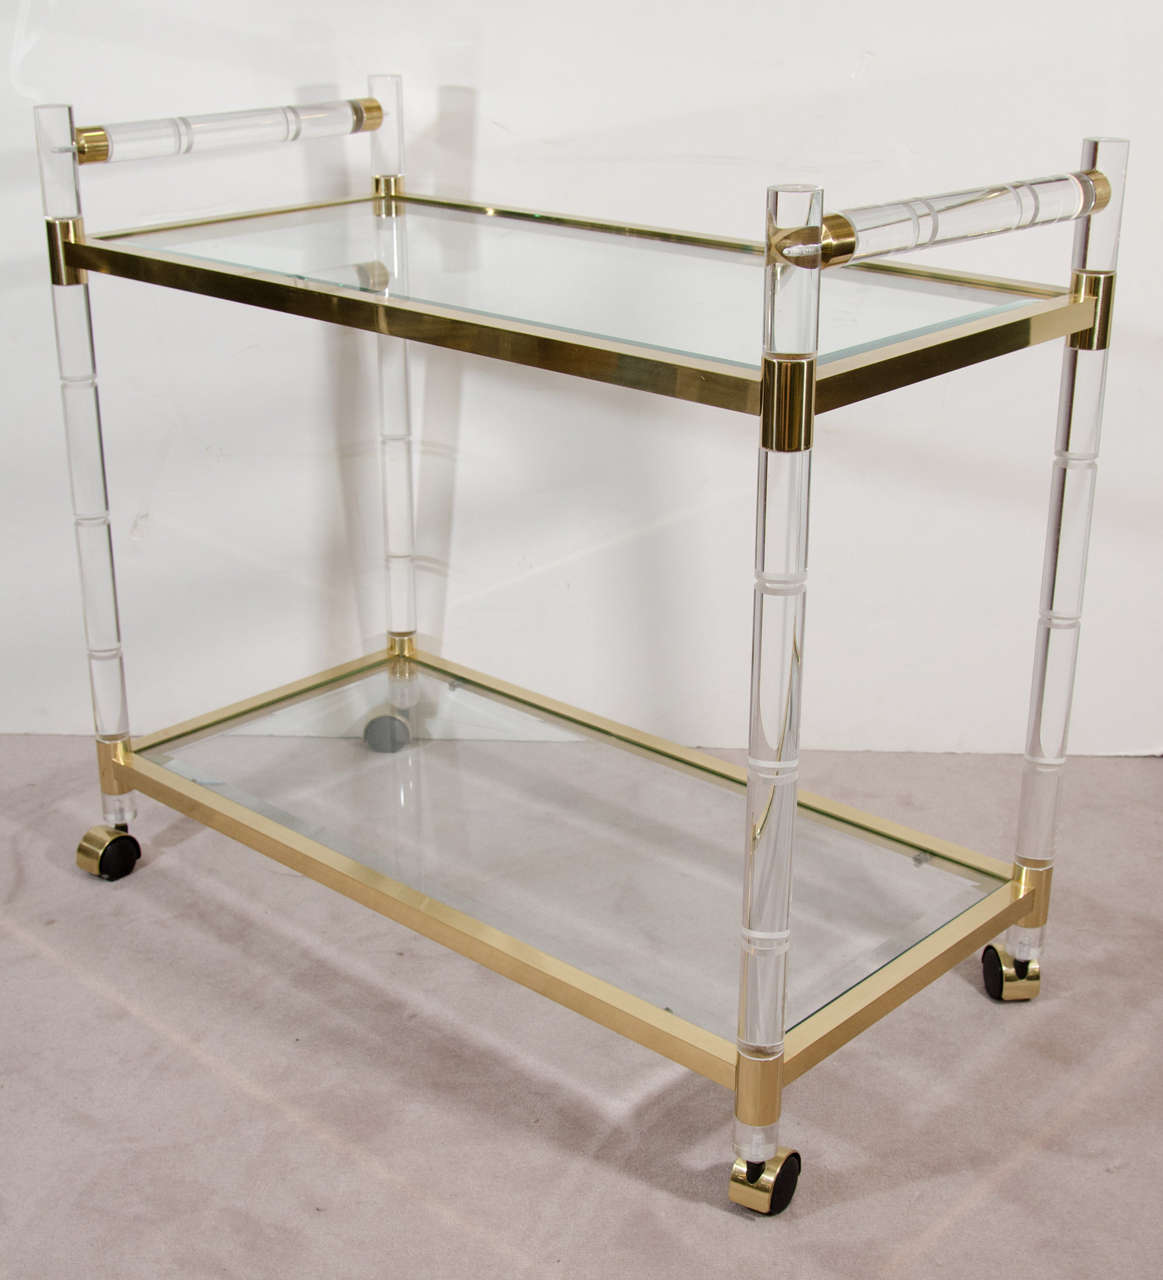 A mid century 1970s two-tier bar cart on casters designed by Charles Hollis Jones with a brass and stylized bamboo motif Lucite frame.

Good vintage condition with some minor scratches on Lucite consistent with age and use.